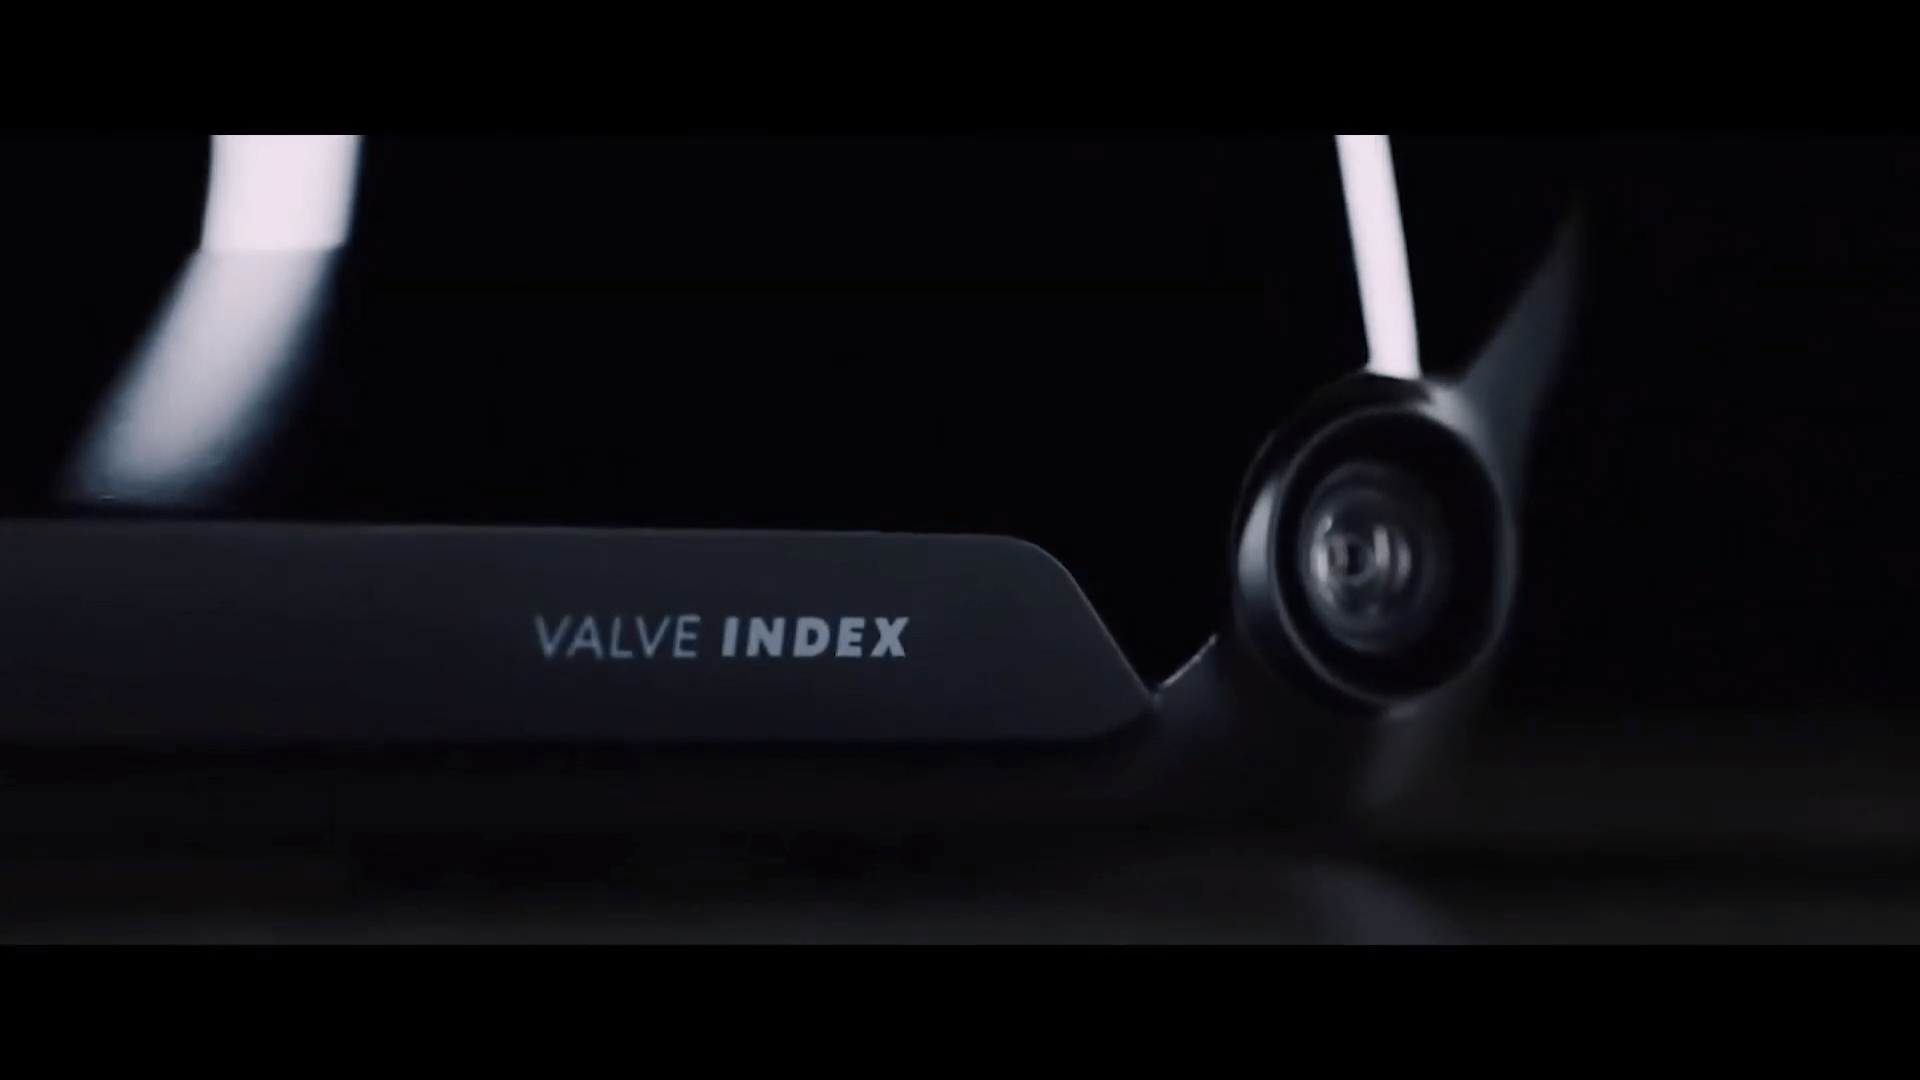 Valve Index Out Of Stock In Majority Of Regions Following Half-Life: Alyx Announcement